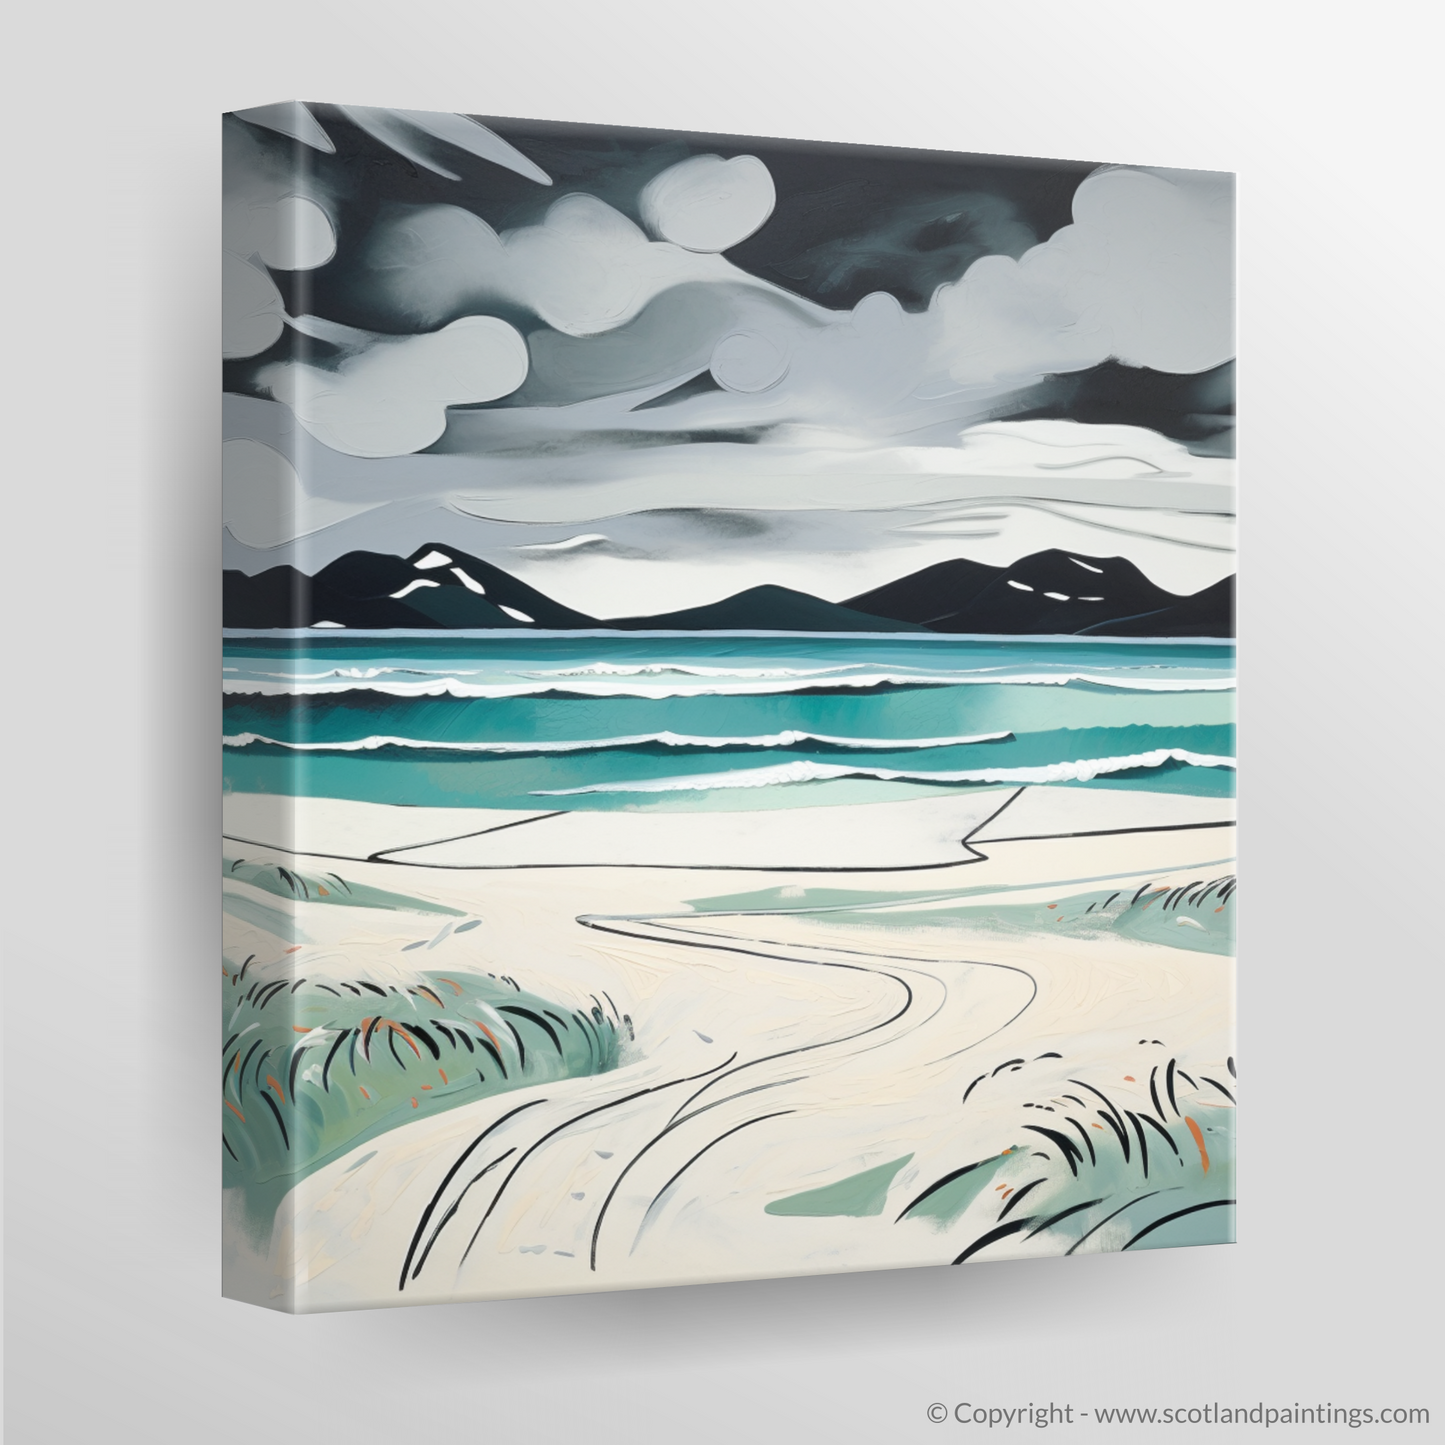 Storm over Luskentyre Sands: A Naive Art Homage to Scottish Shores